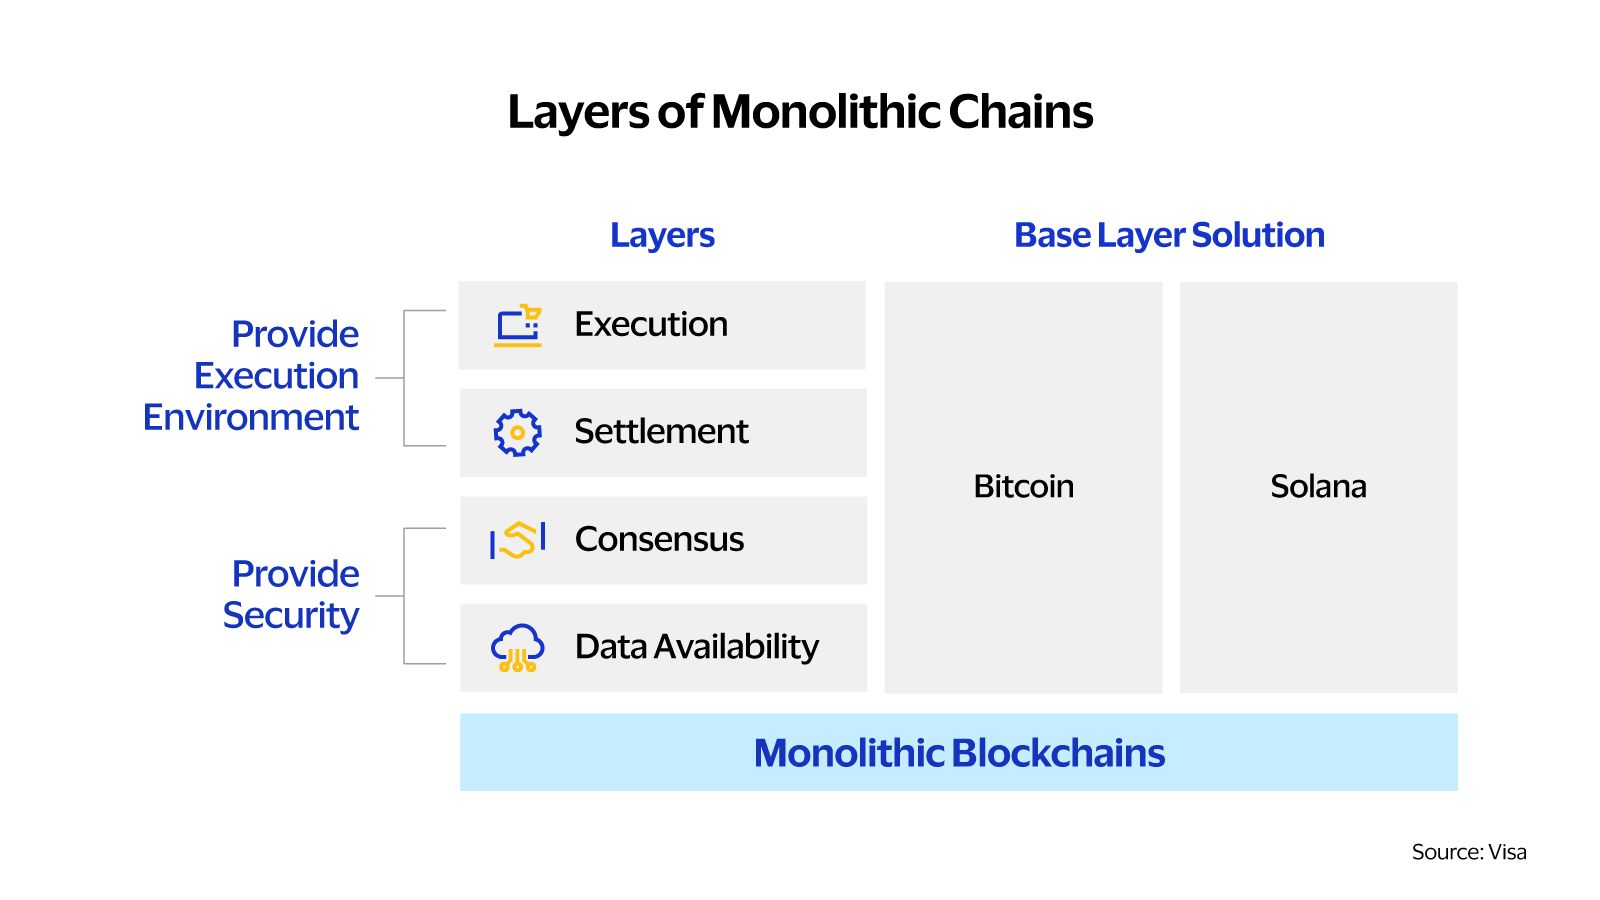 Layers of monolithic chains. See image description for details.